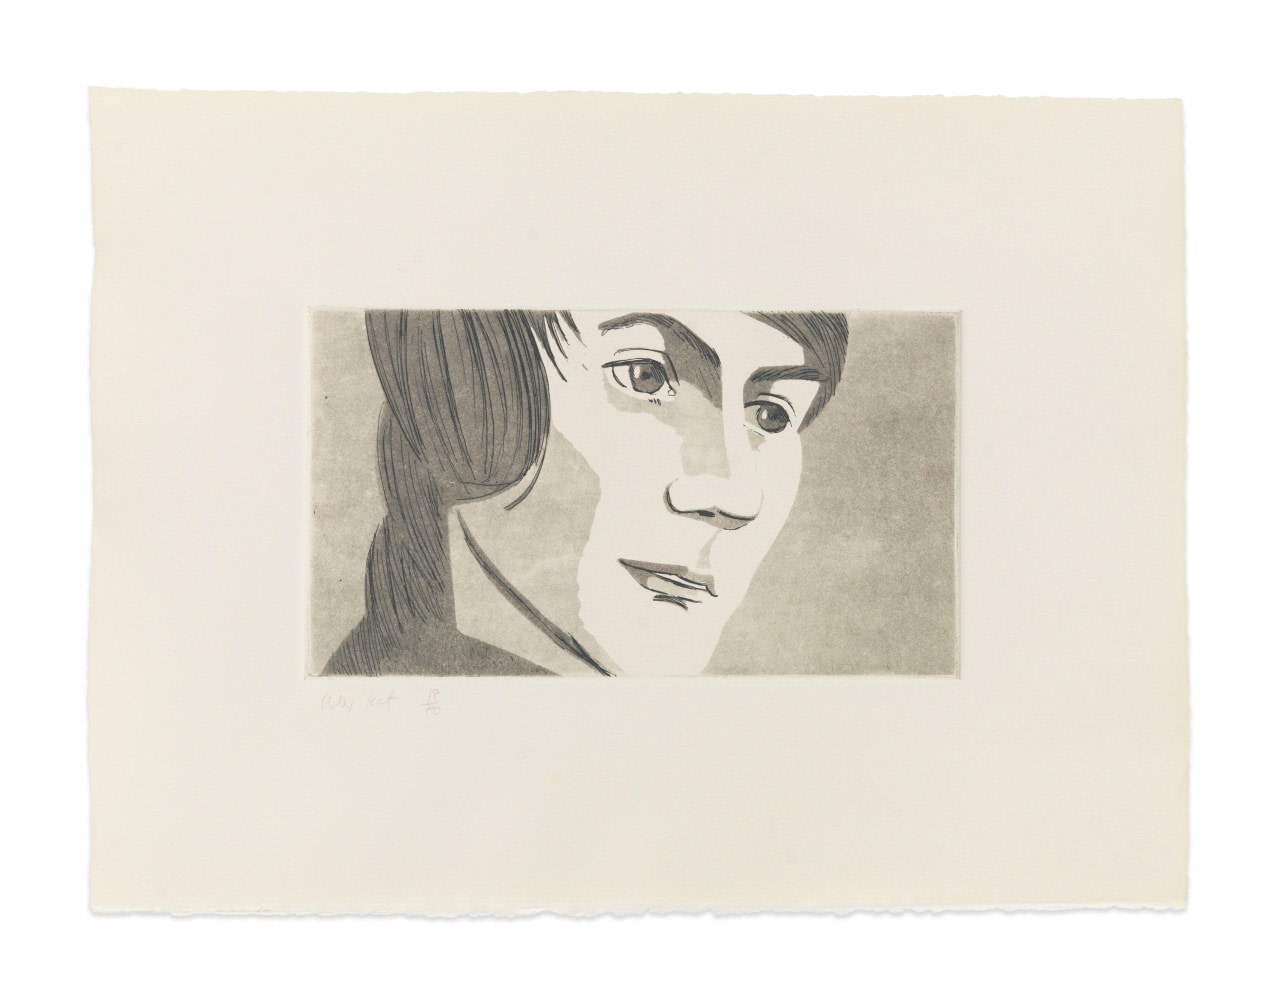 June Ekman&amp;rsquo;s Class: Timmie, 1972

aquatint, edition of 50

11 1/8 x 15 in. / 28.3 x 38.1 cm